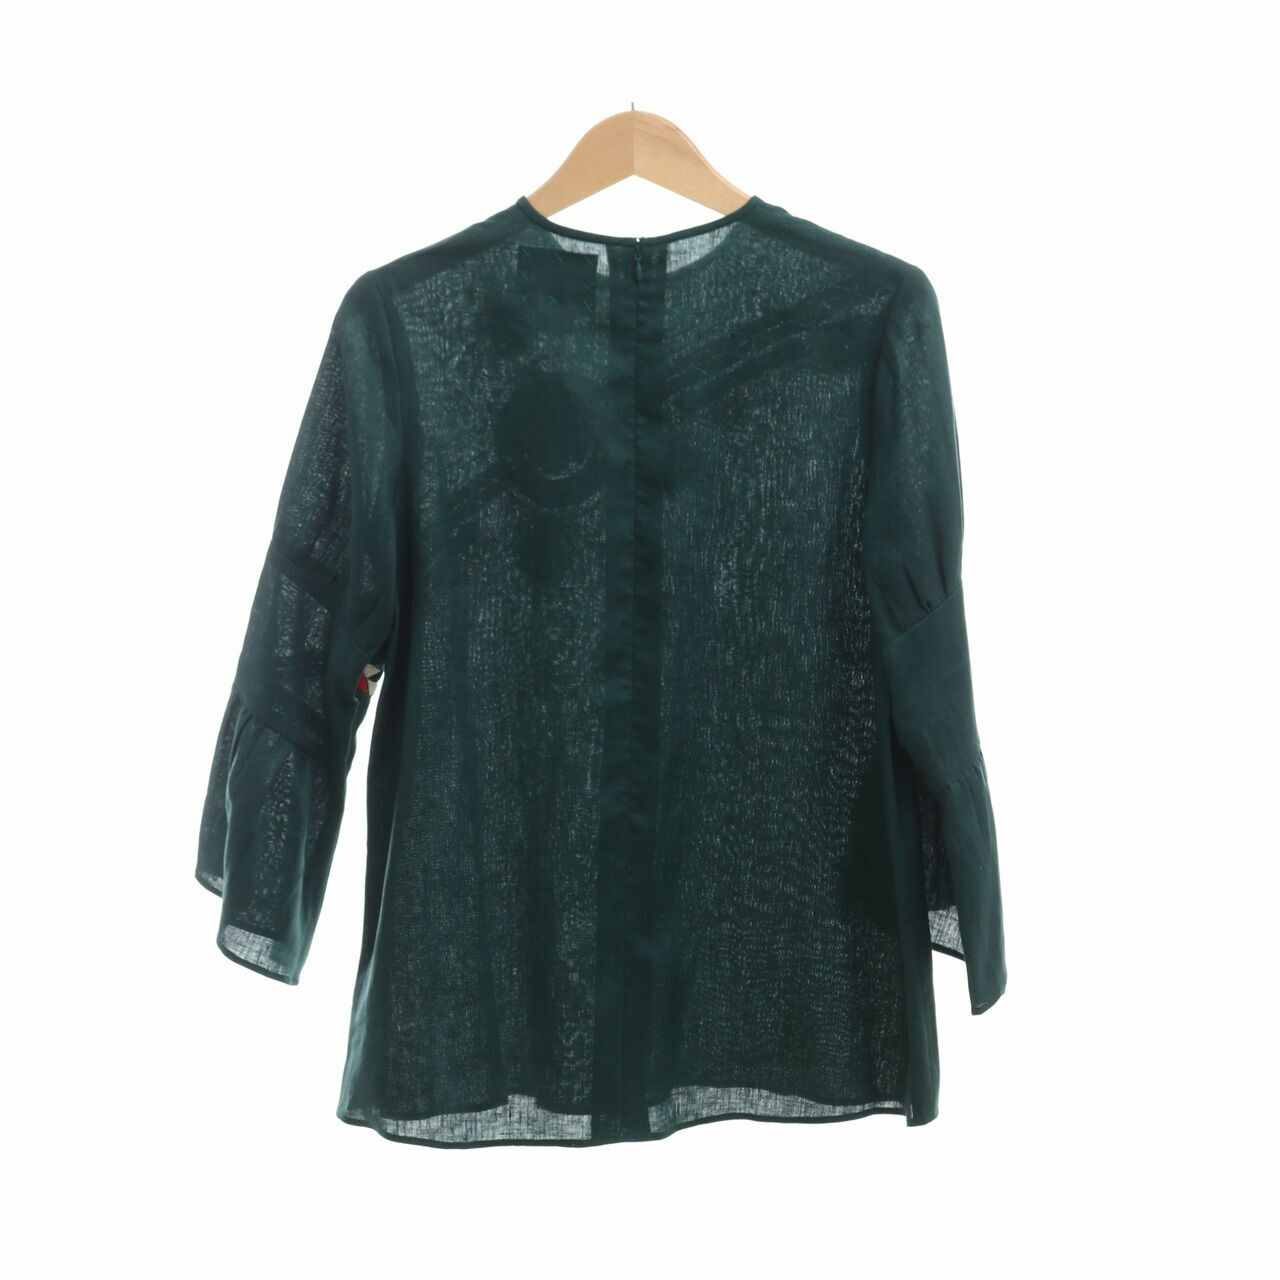 Happa Mel Ahyar Green Embroidered Blouse